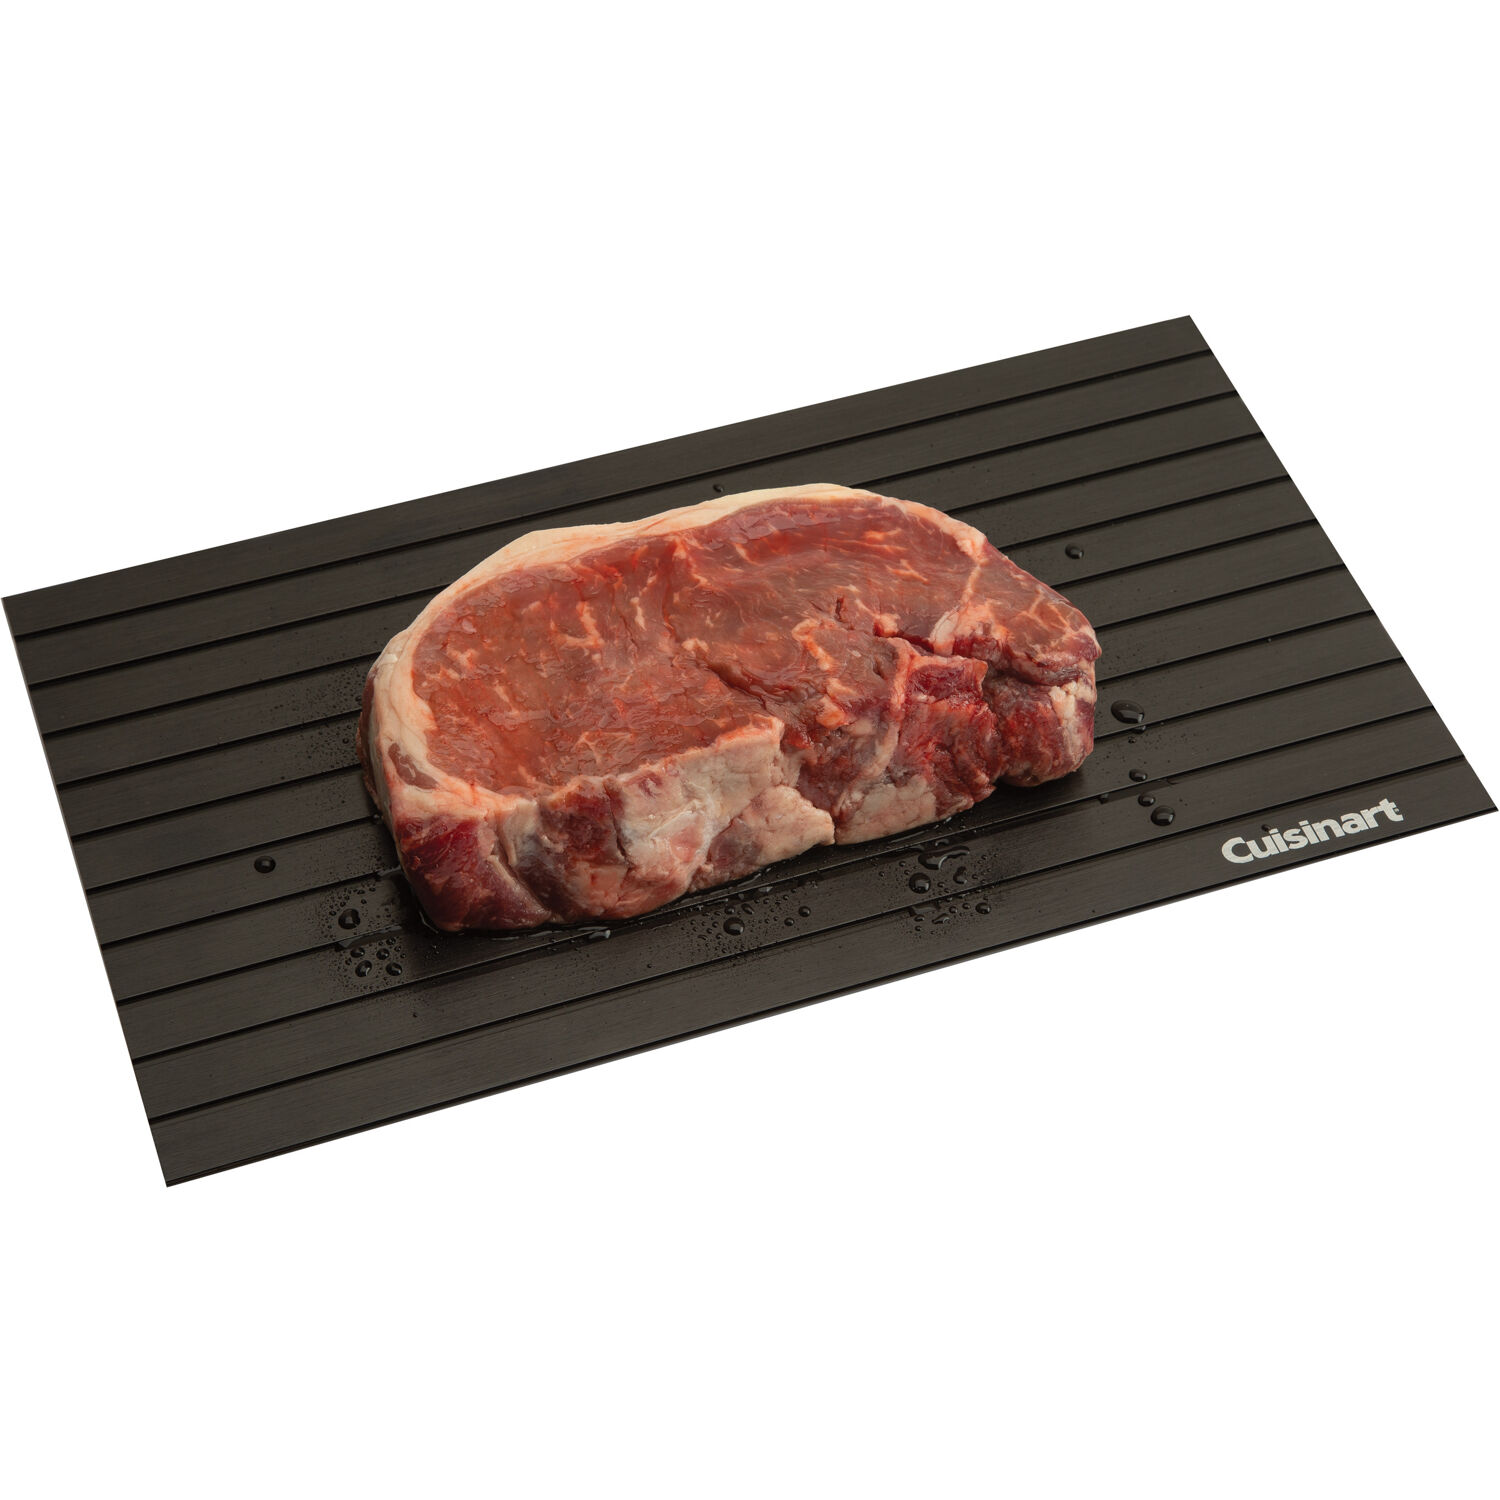 Cuisinart BBQ Defrosting Tray - image 5 of 9